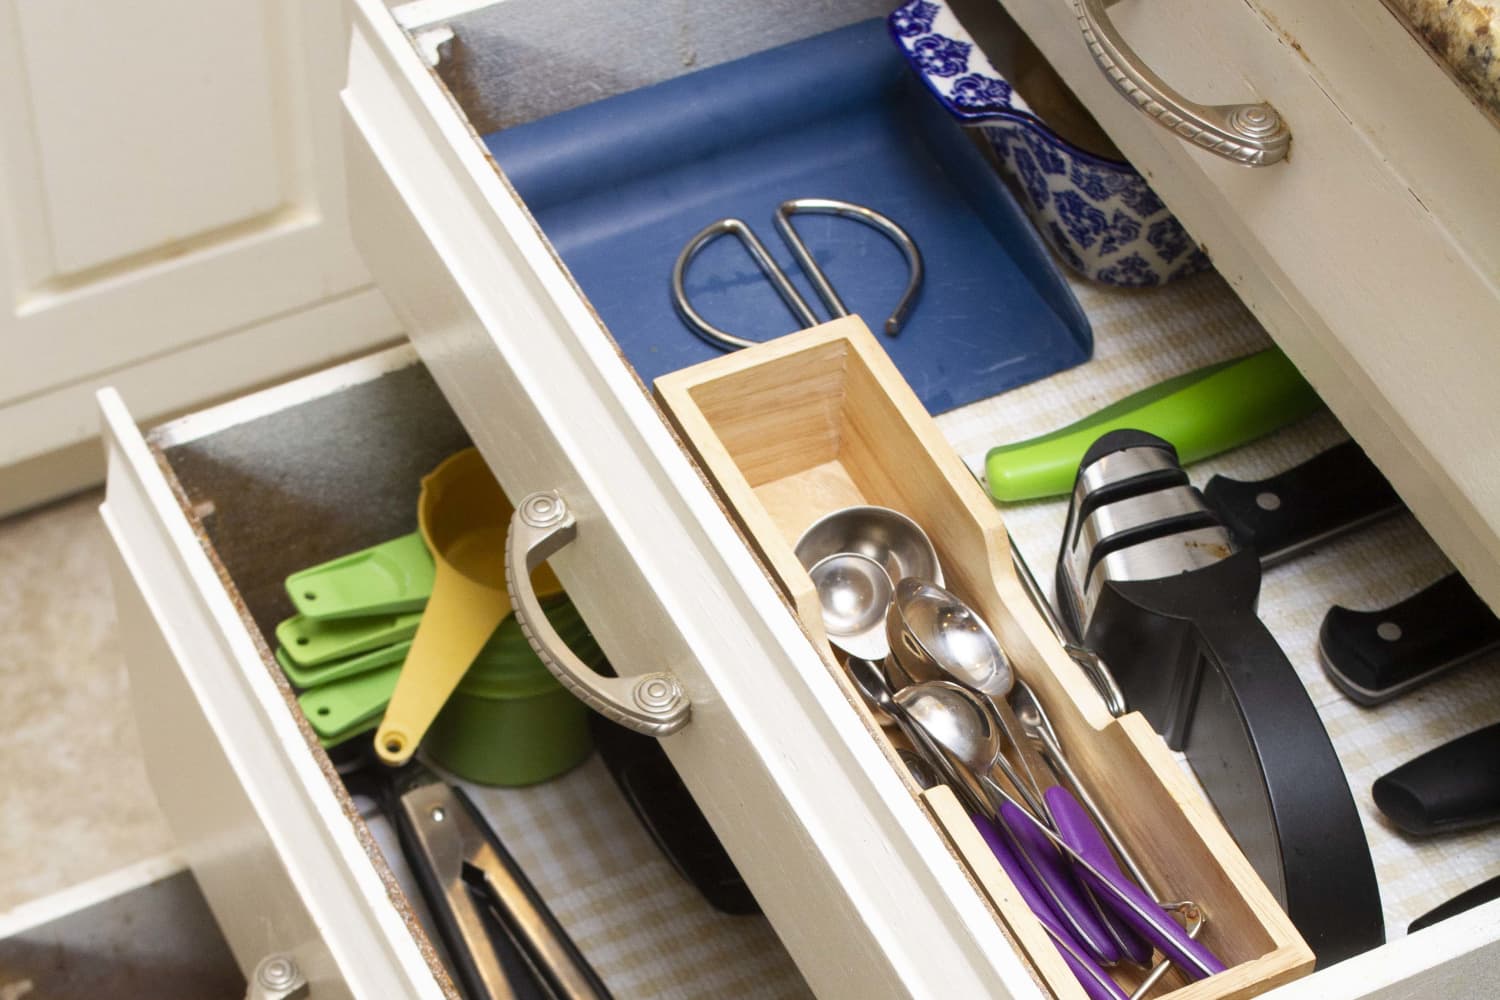 Must-Have Kitchen Organizing Tools According to a Pro